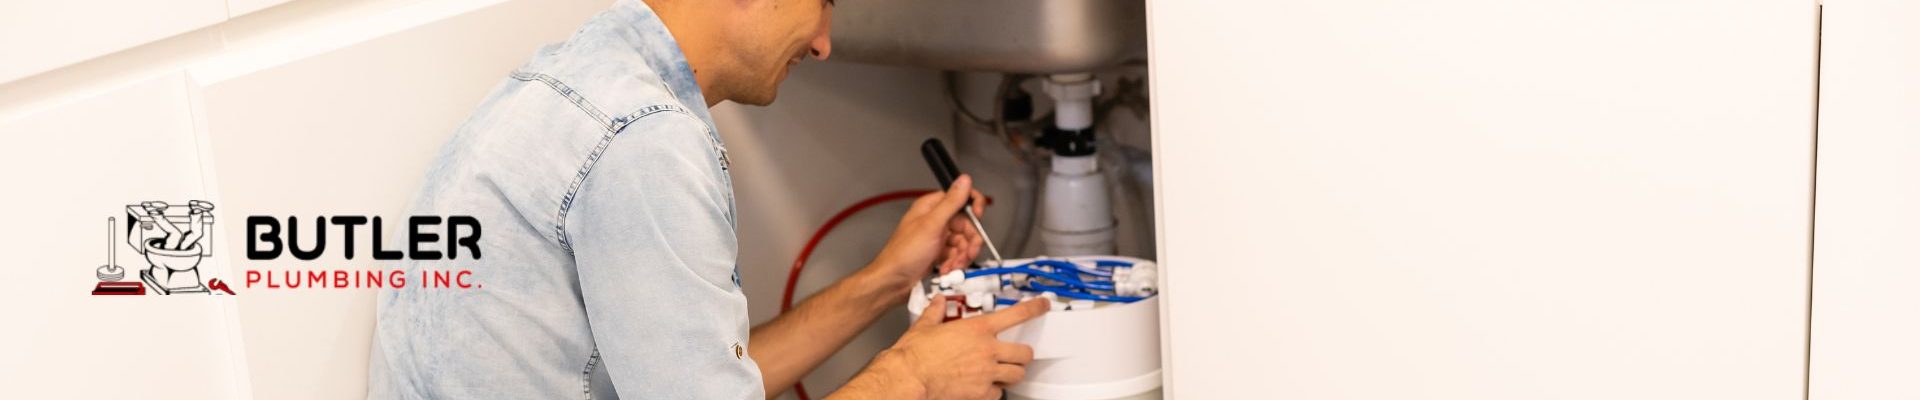 How To Find The Best Plumbers In Norman